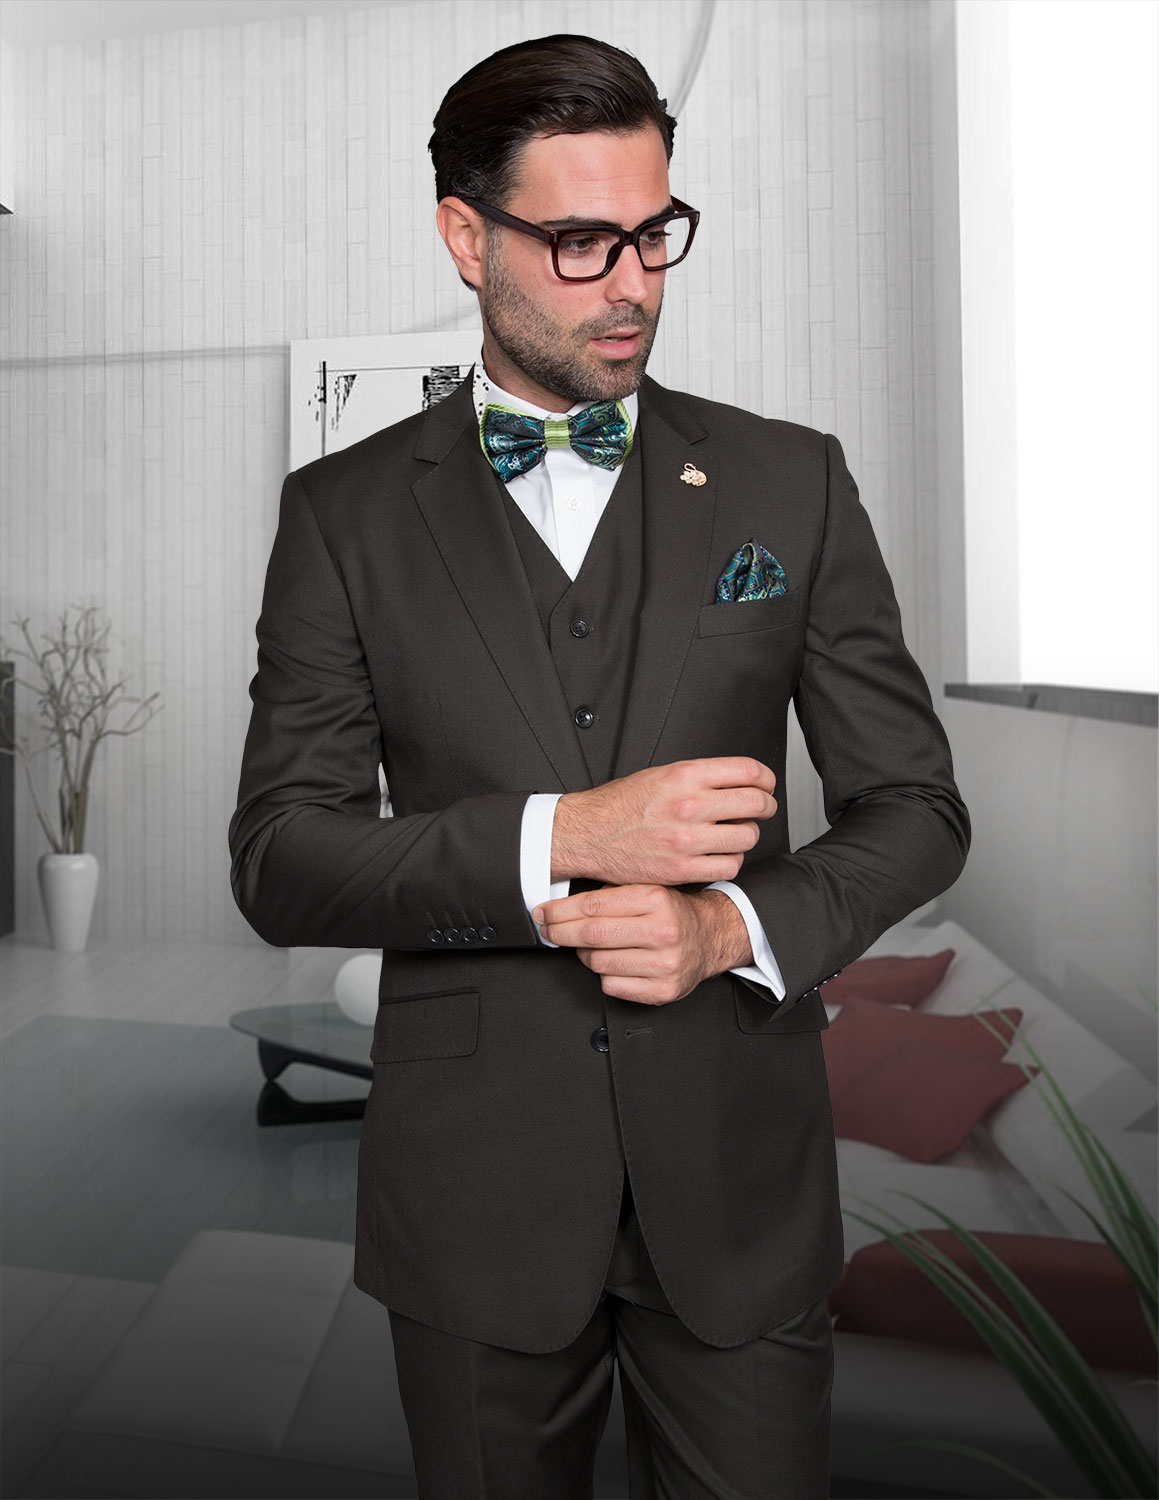 STATEMENT STZV-100 3PC SOLID COLOR OLIVE SUIT. MODERN FIT FLAT FRONT PANTS. SUPER 150'S ITALIAN FABRIC